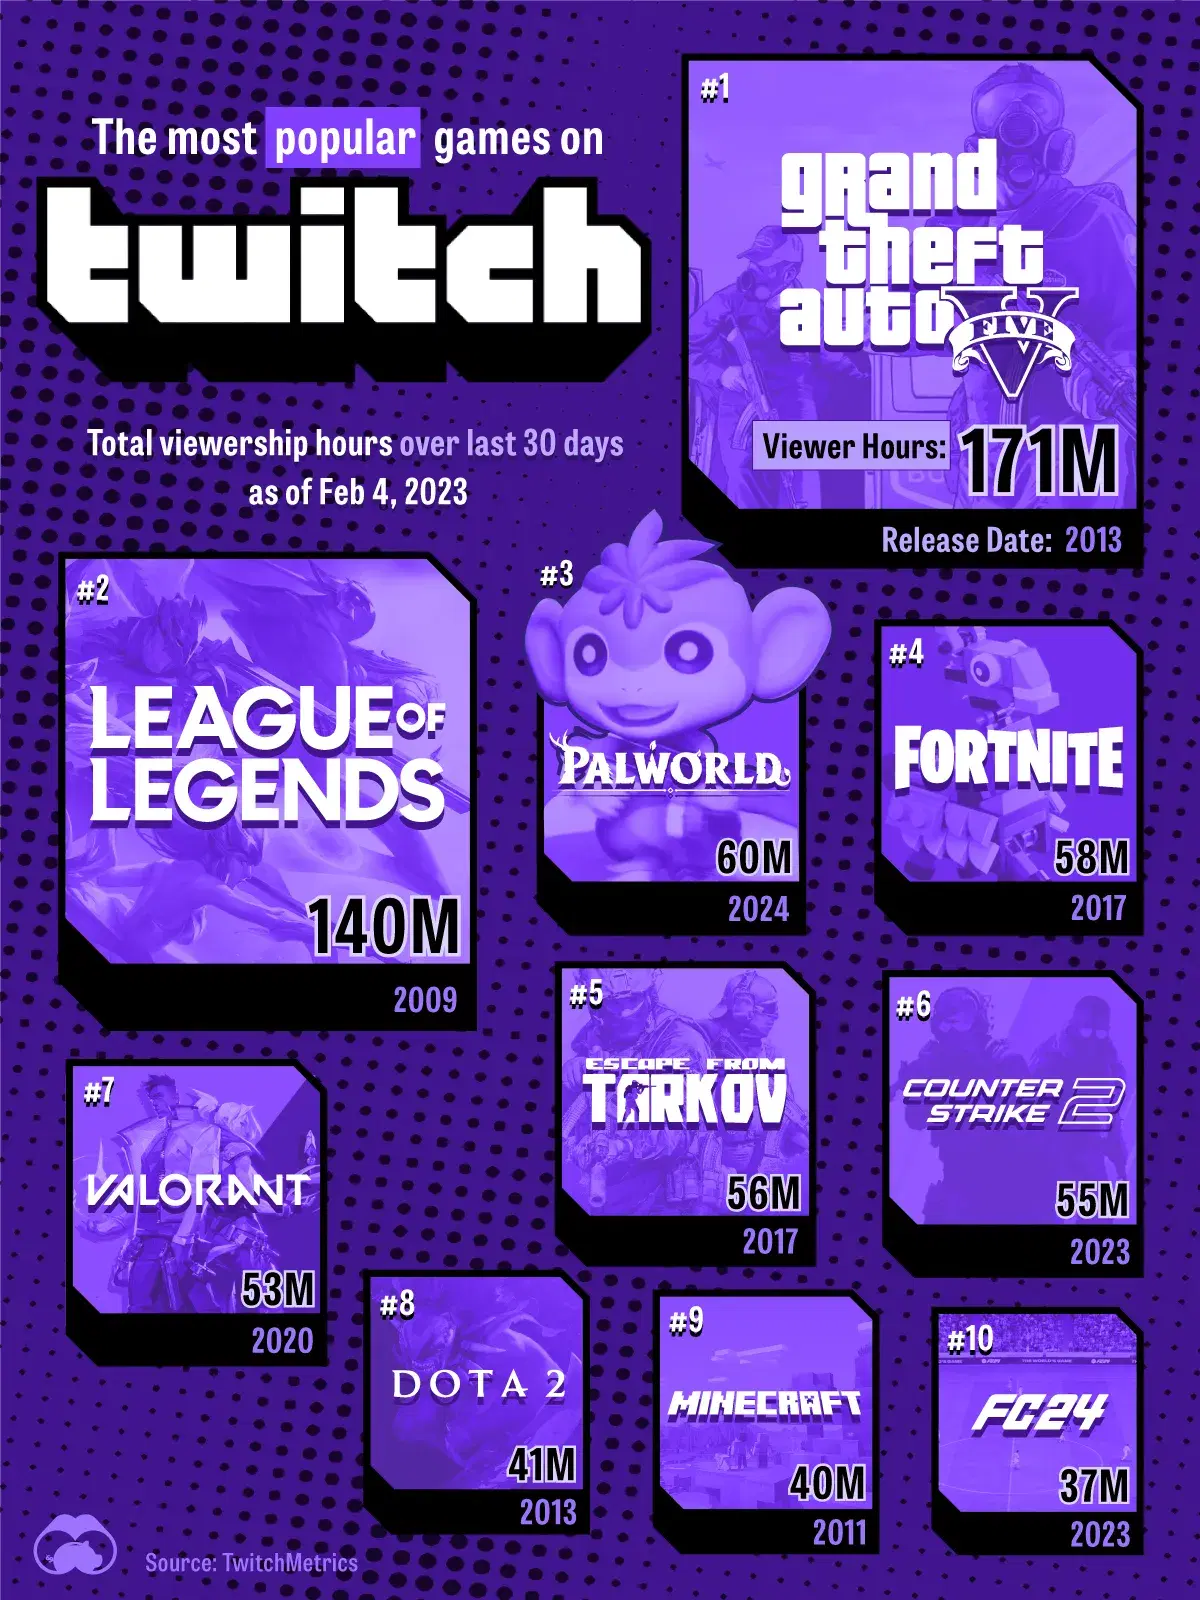 The Top 10 Games on Twitch Logged 700M Viewer Hours in 30 Days 🎮